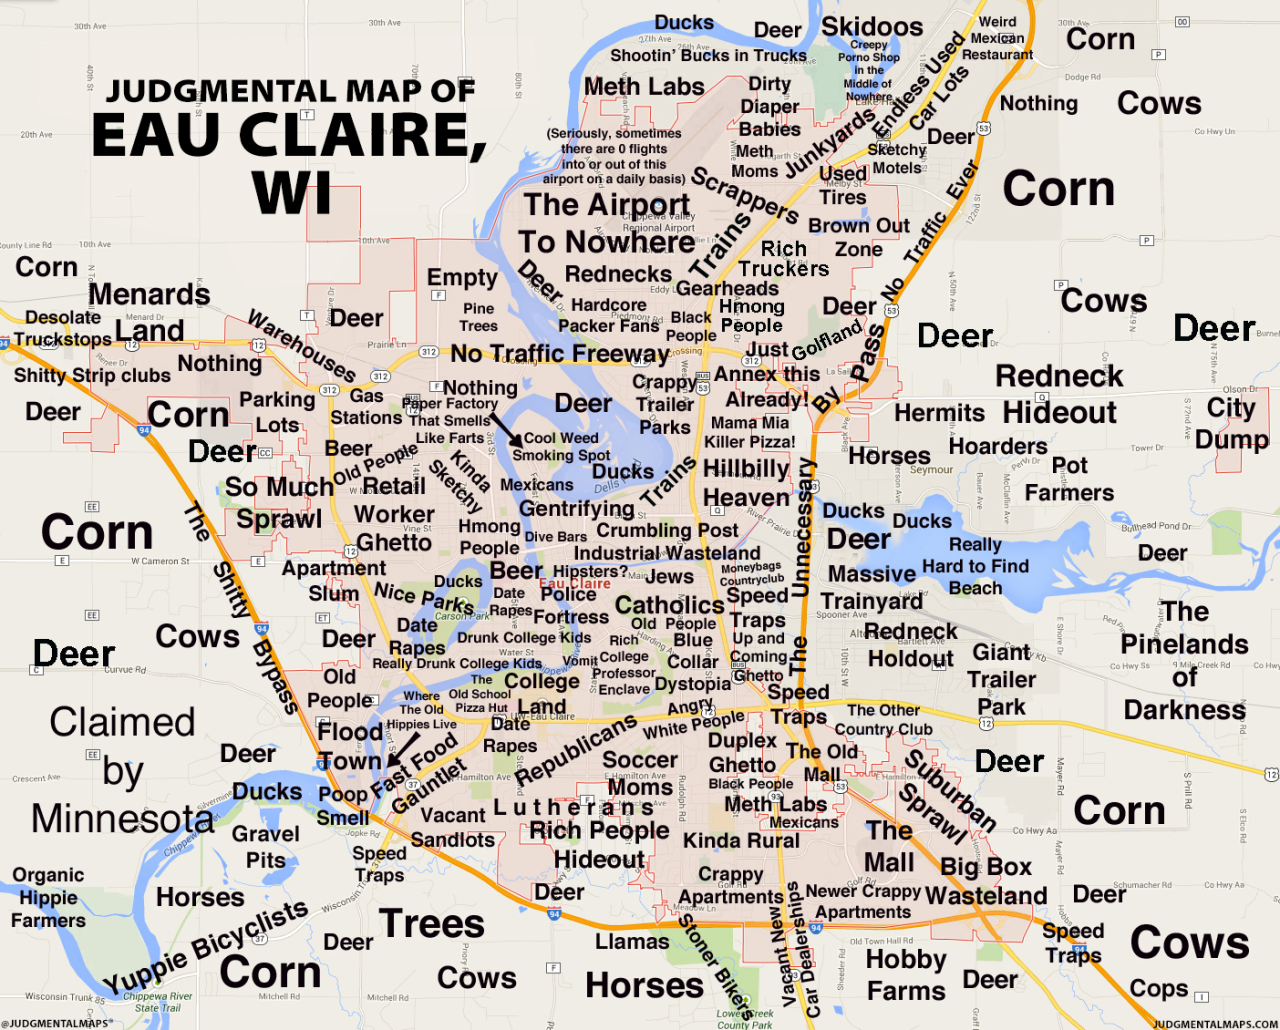 JUDGMENTAL MAPS Eau Claire, WI by leepacoindustries Copr. 2015...